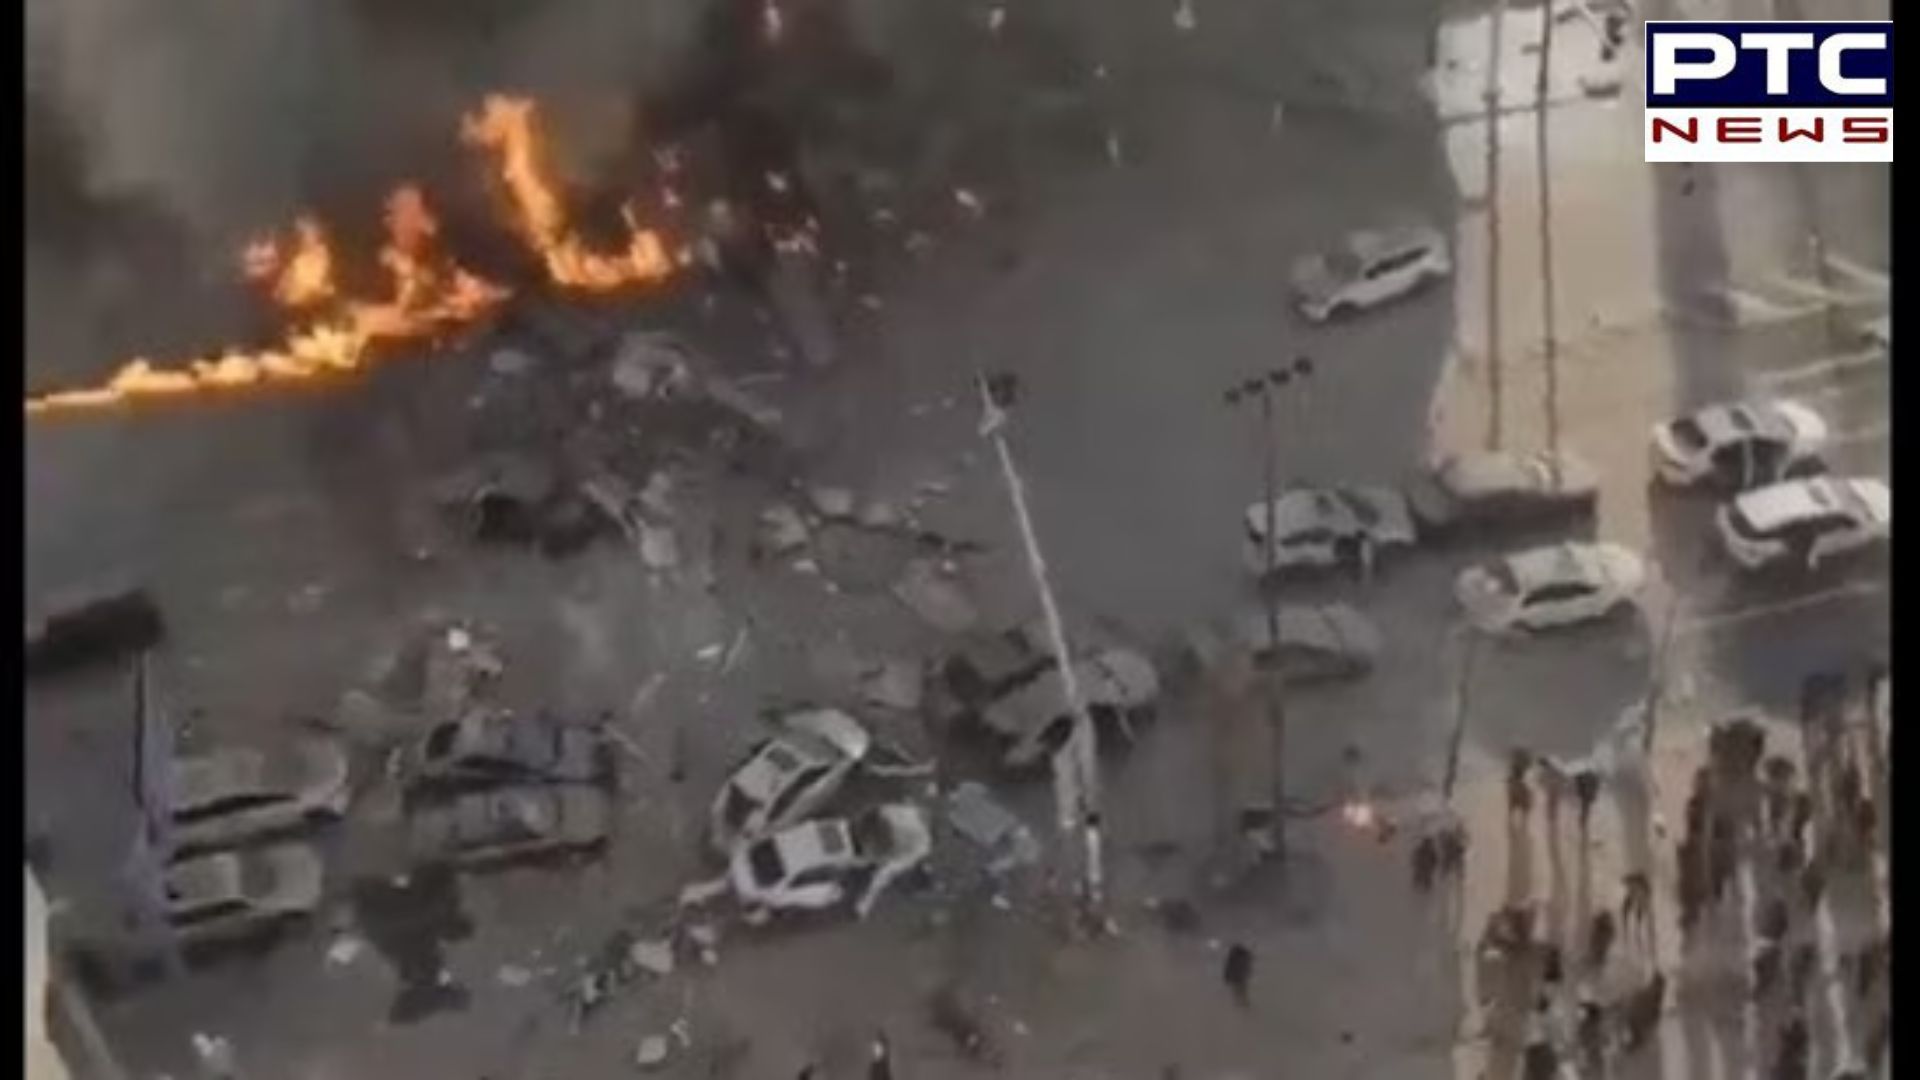 Massive explosion in China's Yanjiao causes damage to numerous buildings and vehicles: Reports